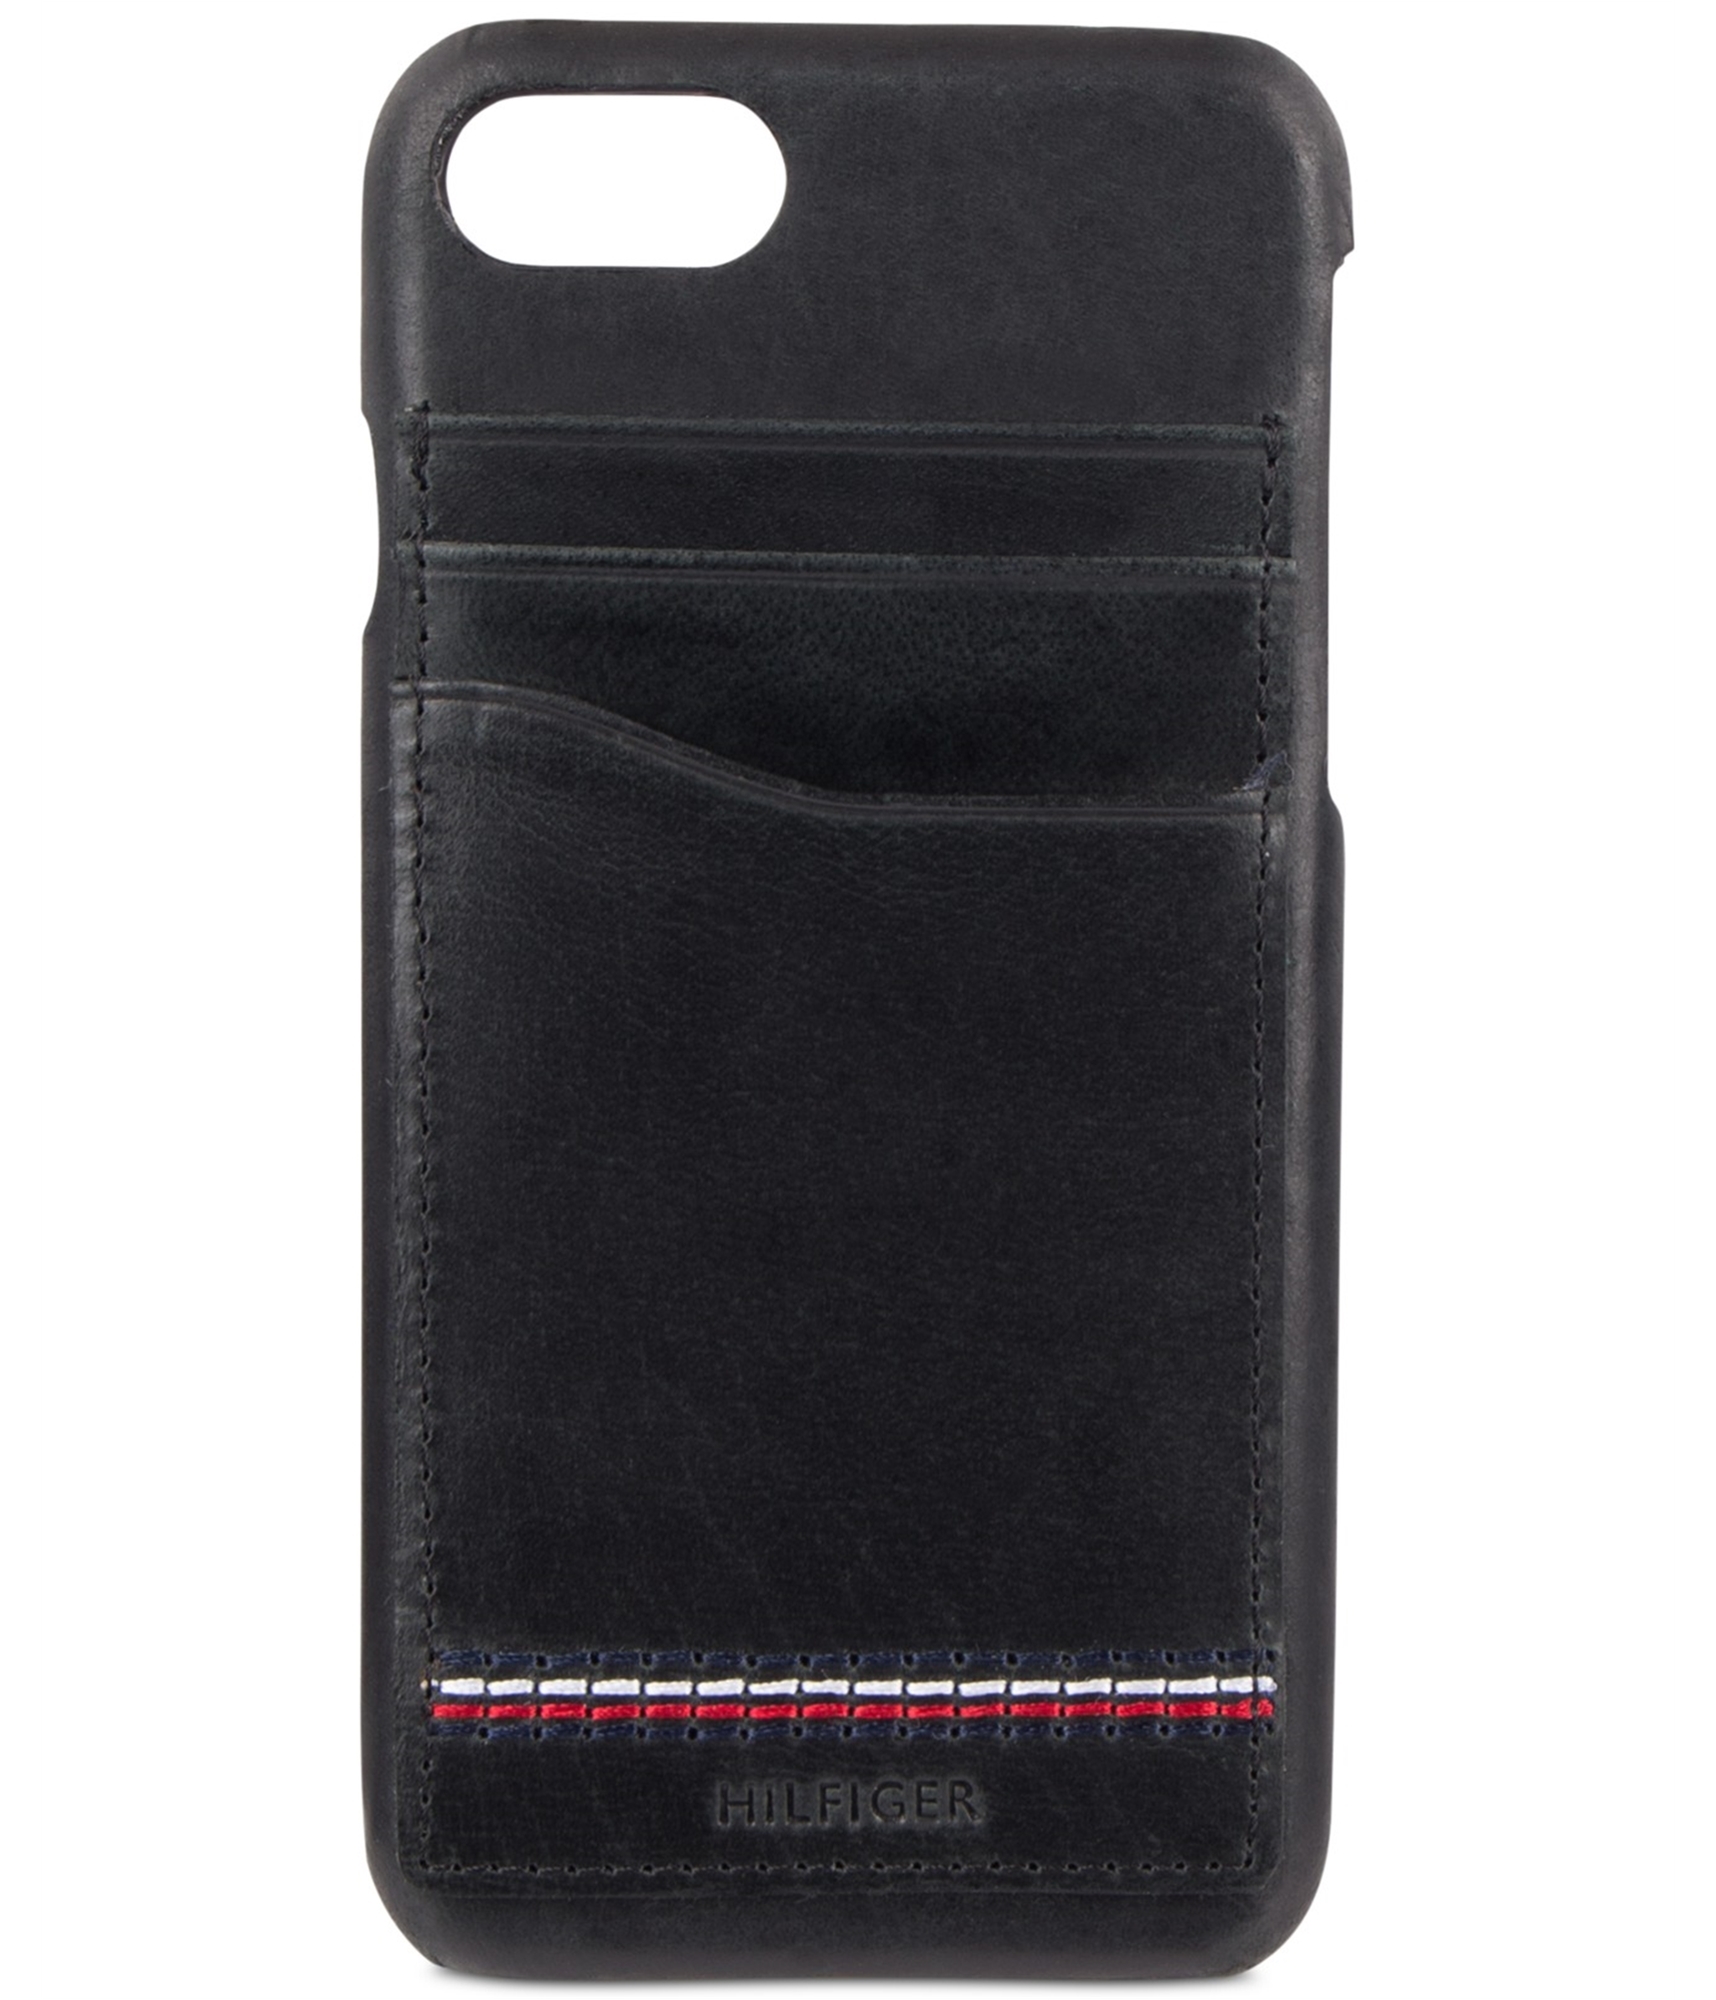 Buy a Unisex-Adult Unisex Leather iPhone 7 Online | TagsWeekly.com